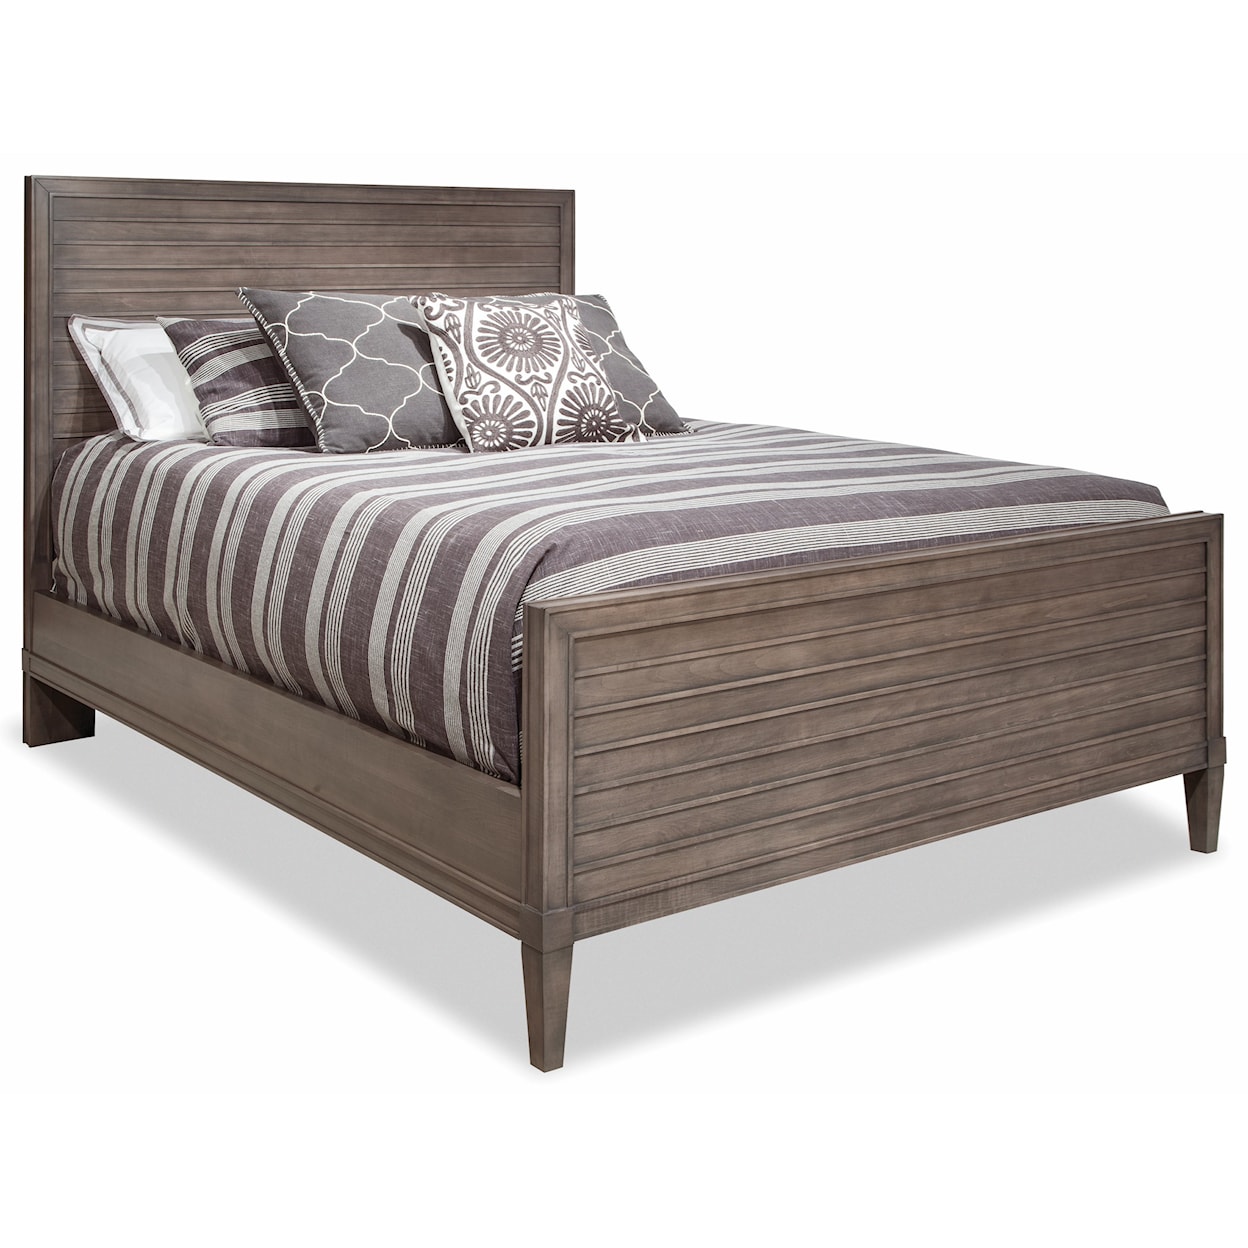 Durham Prominence King Bed